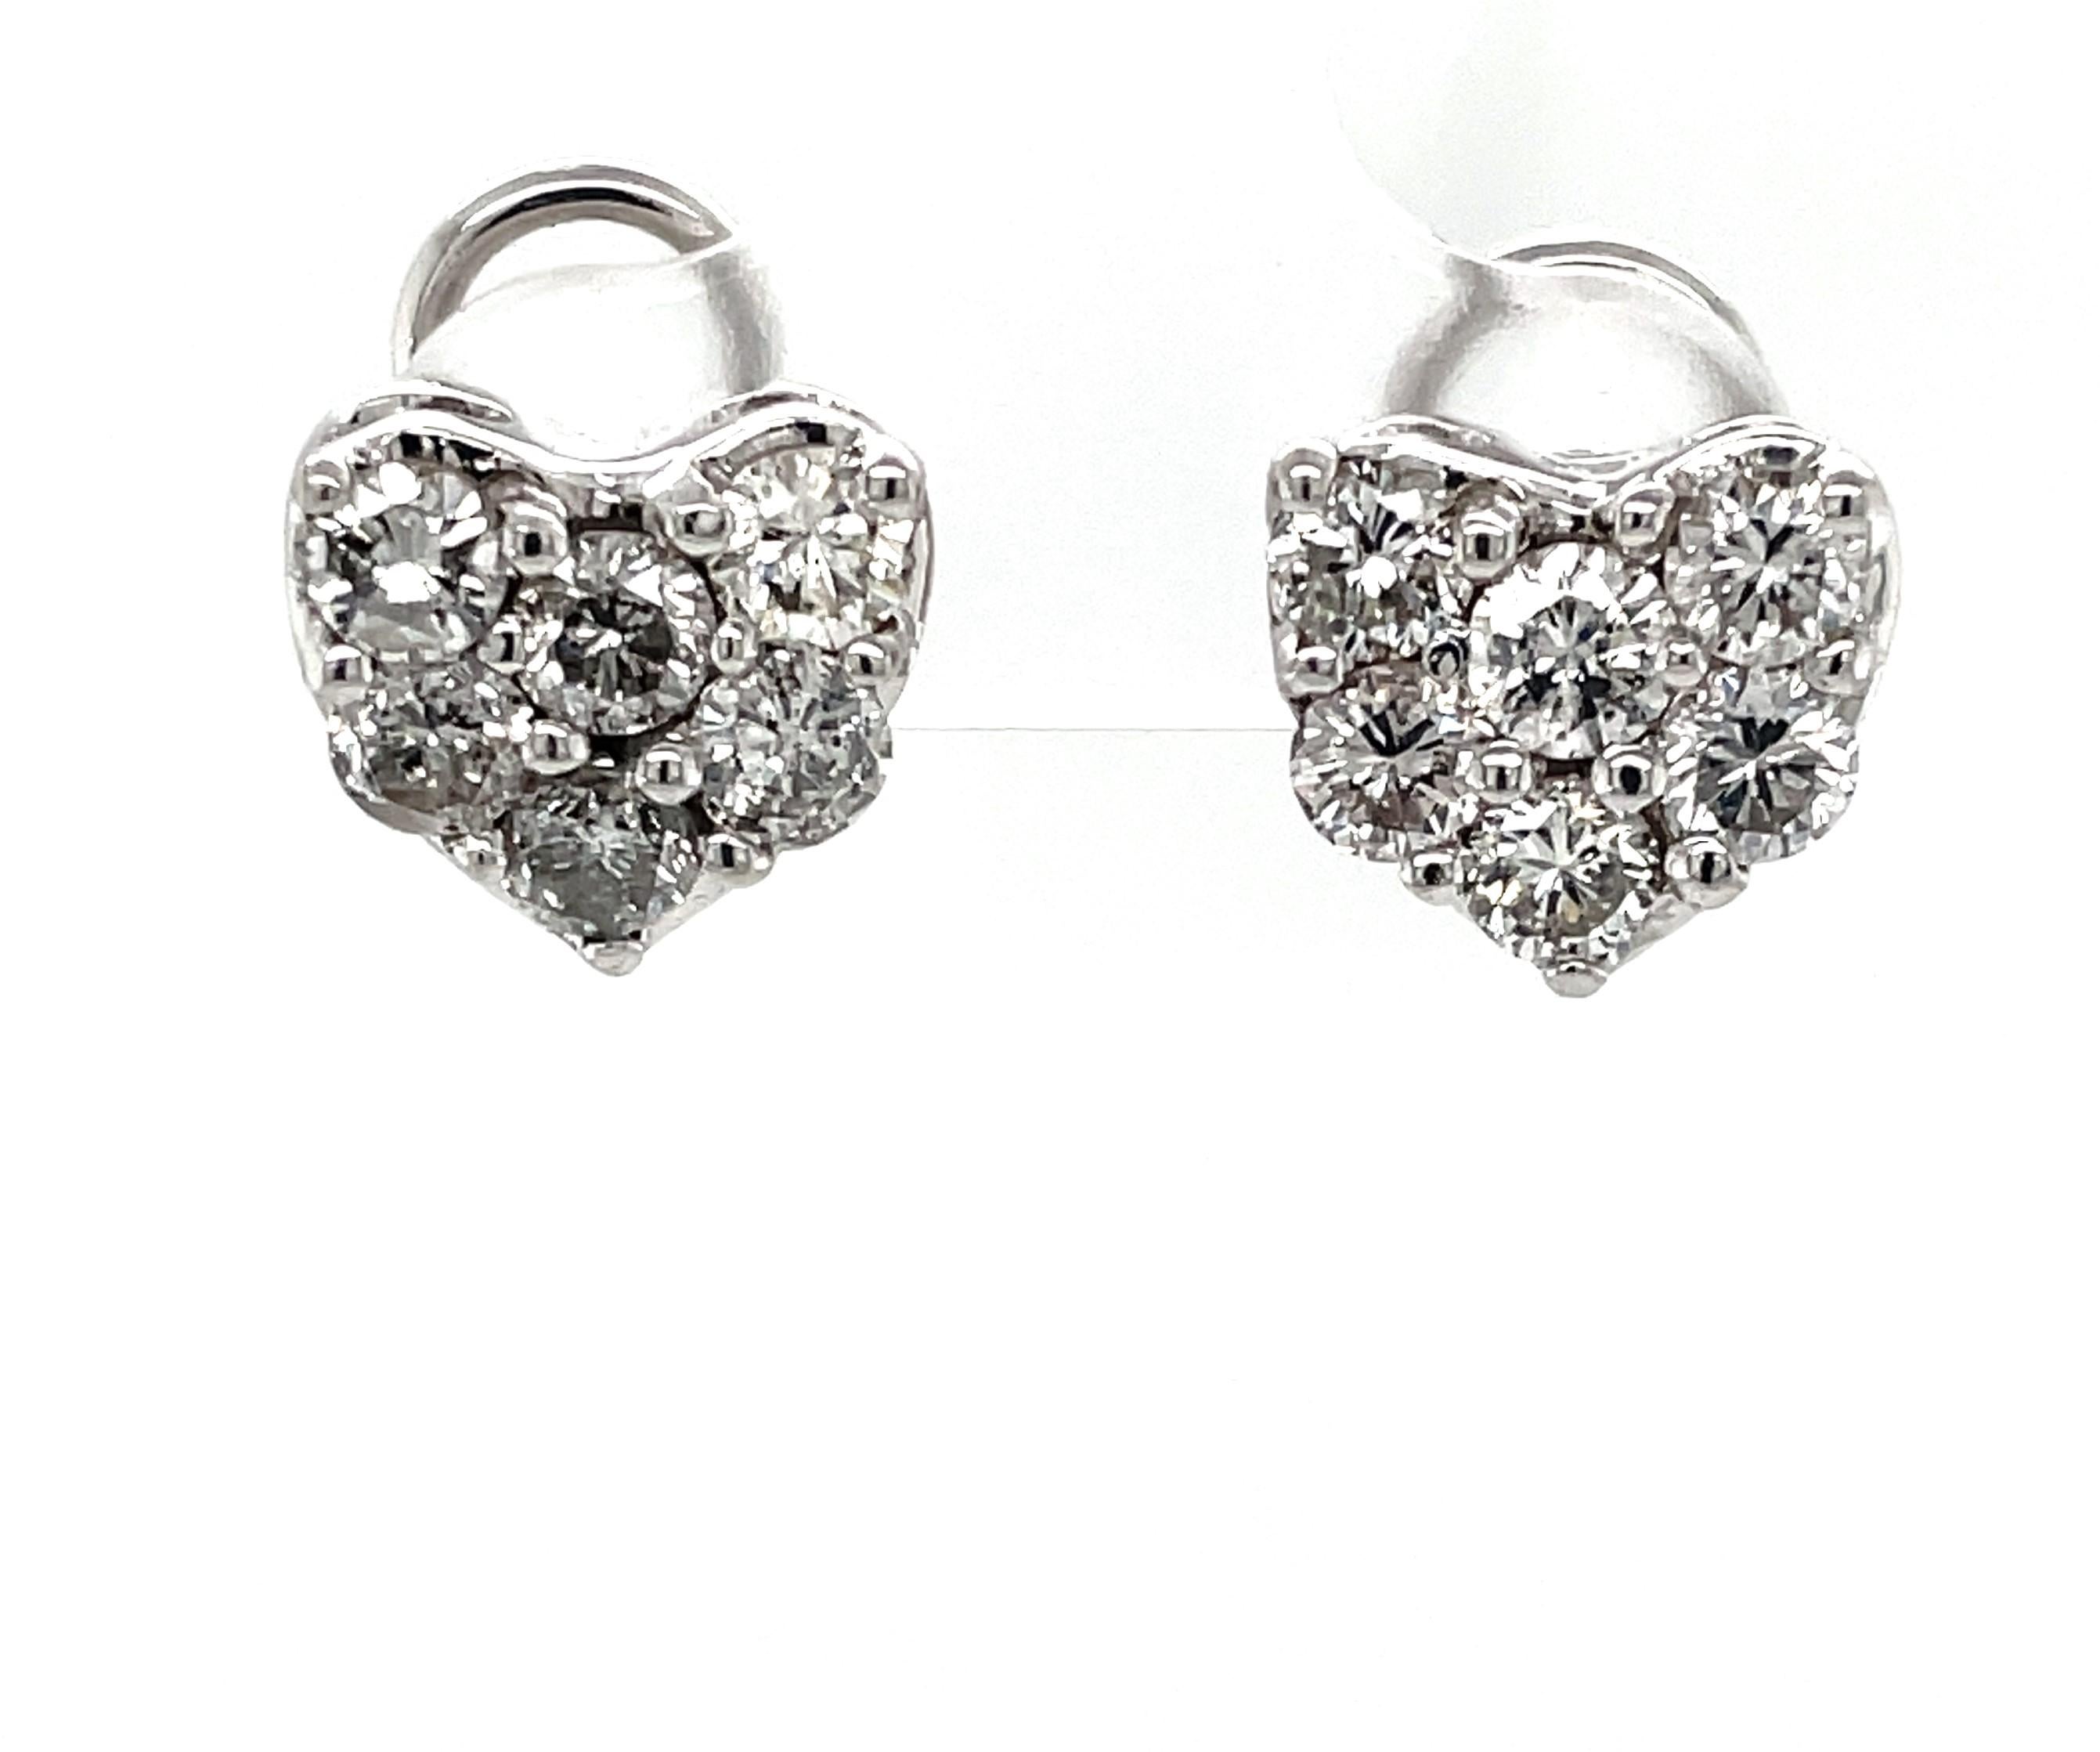 Sweetheart Diamond 14 Karat White Gold Earrings In Excellent Condition For Sale In Mount Kisco, NY